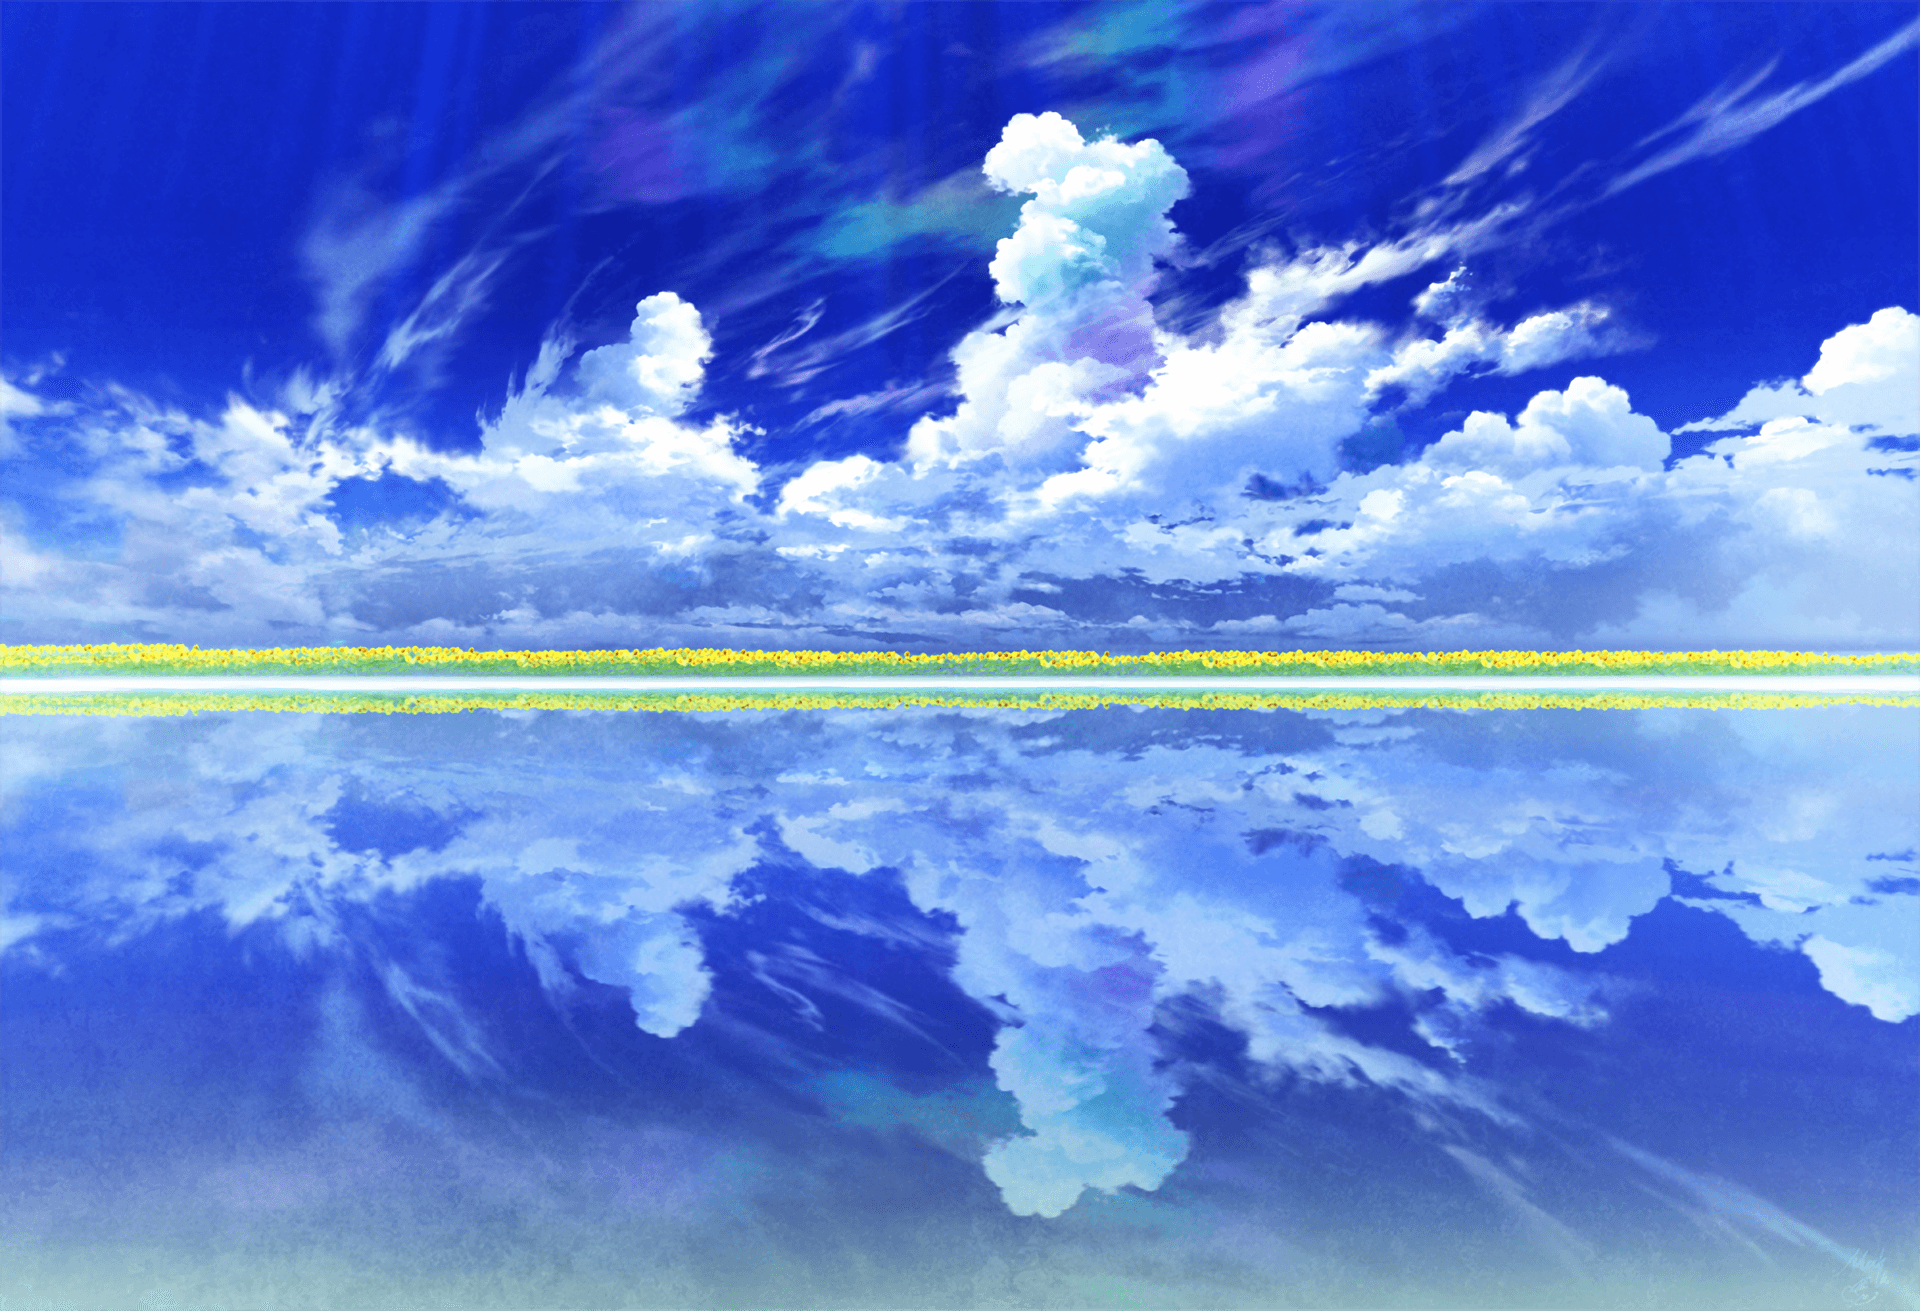 A Blue Sky With Clouds Reflected In The Water